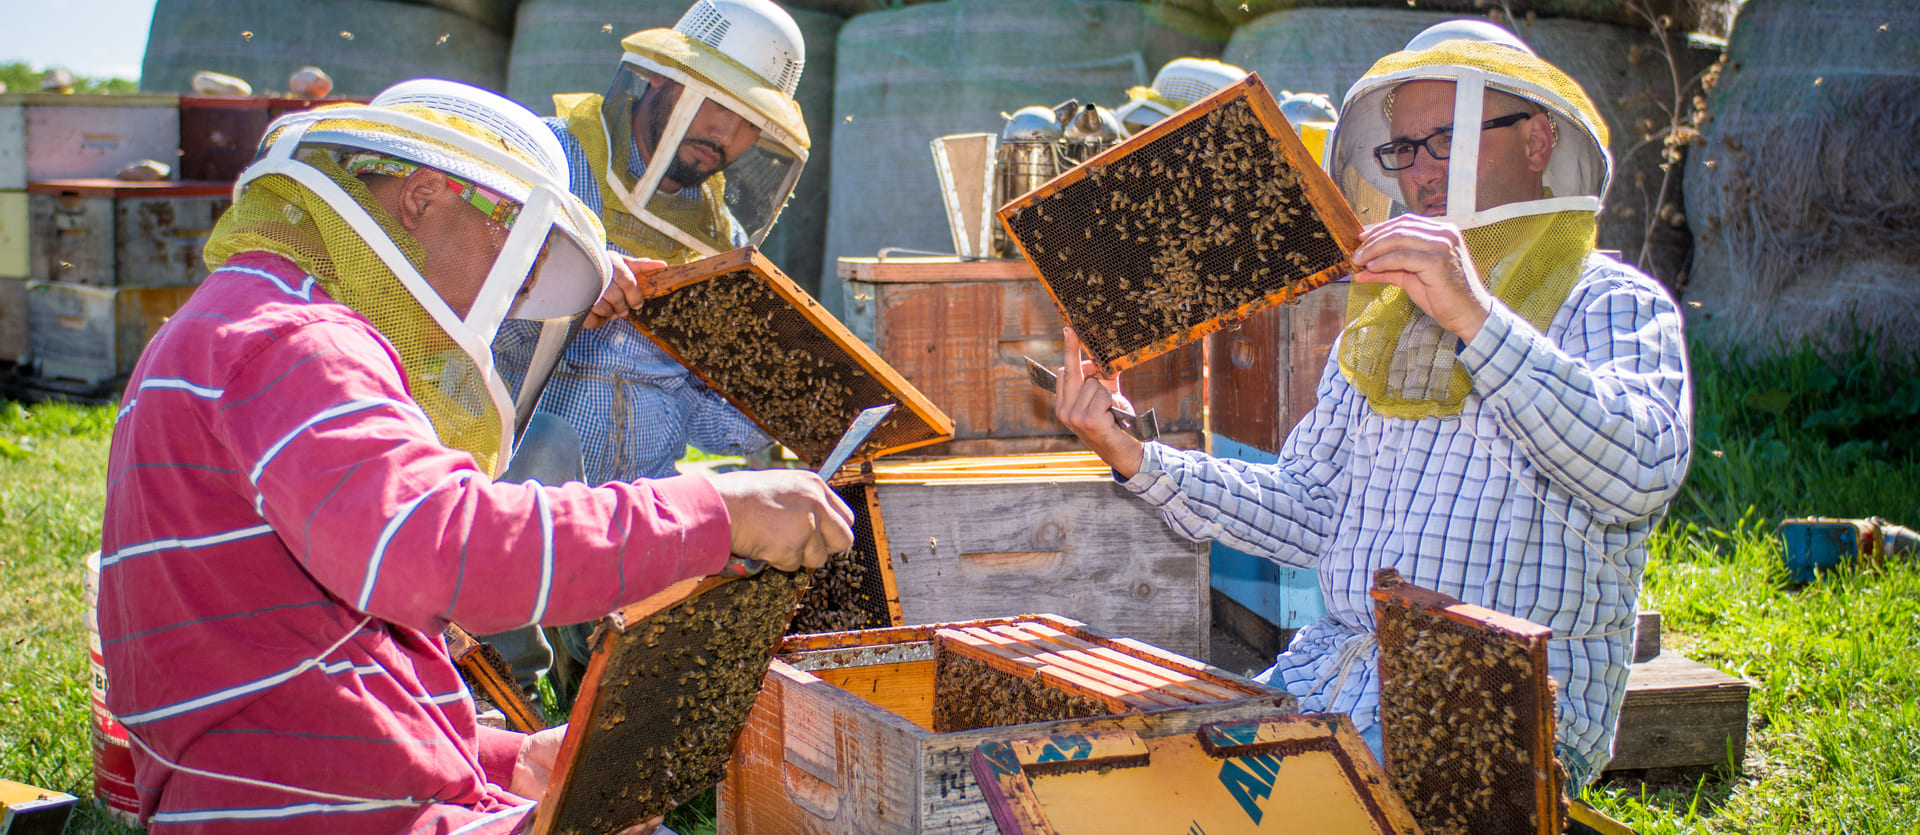 Every beehive gets checked at least 3 times per year. Healthy bees, healthy honey.